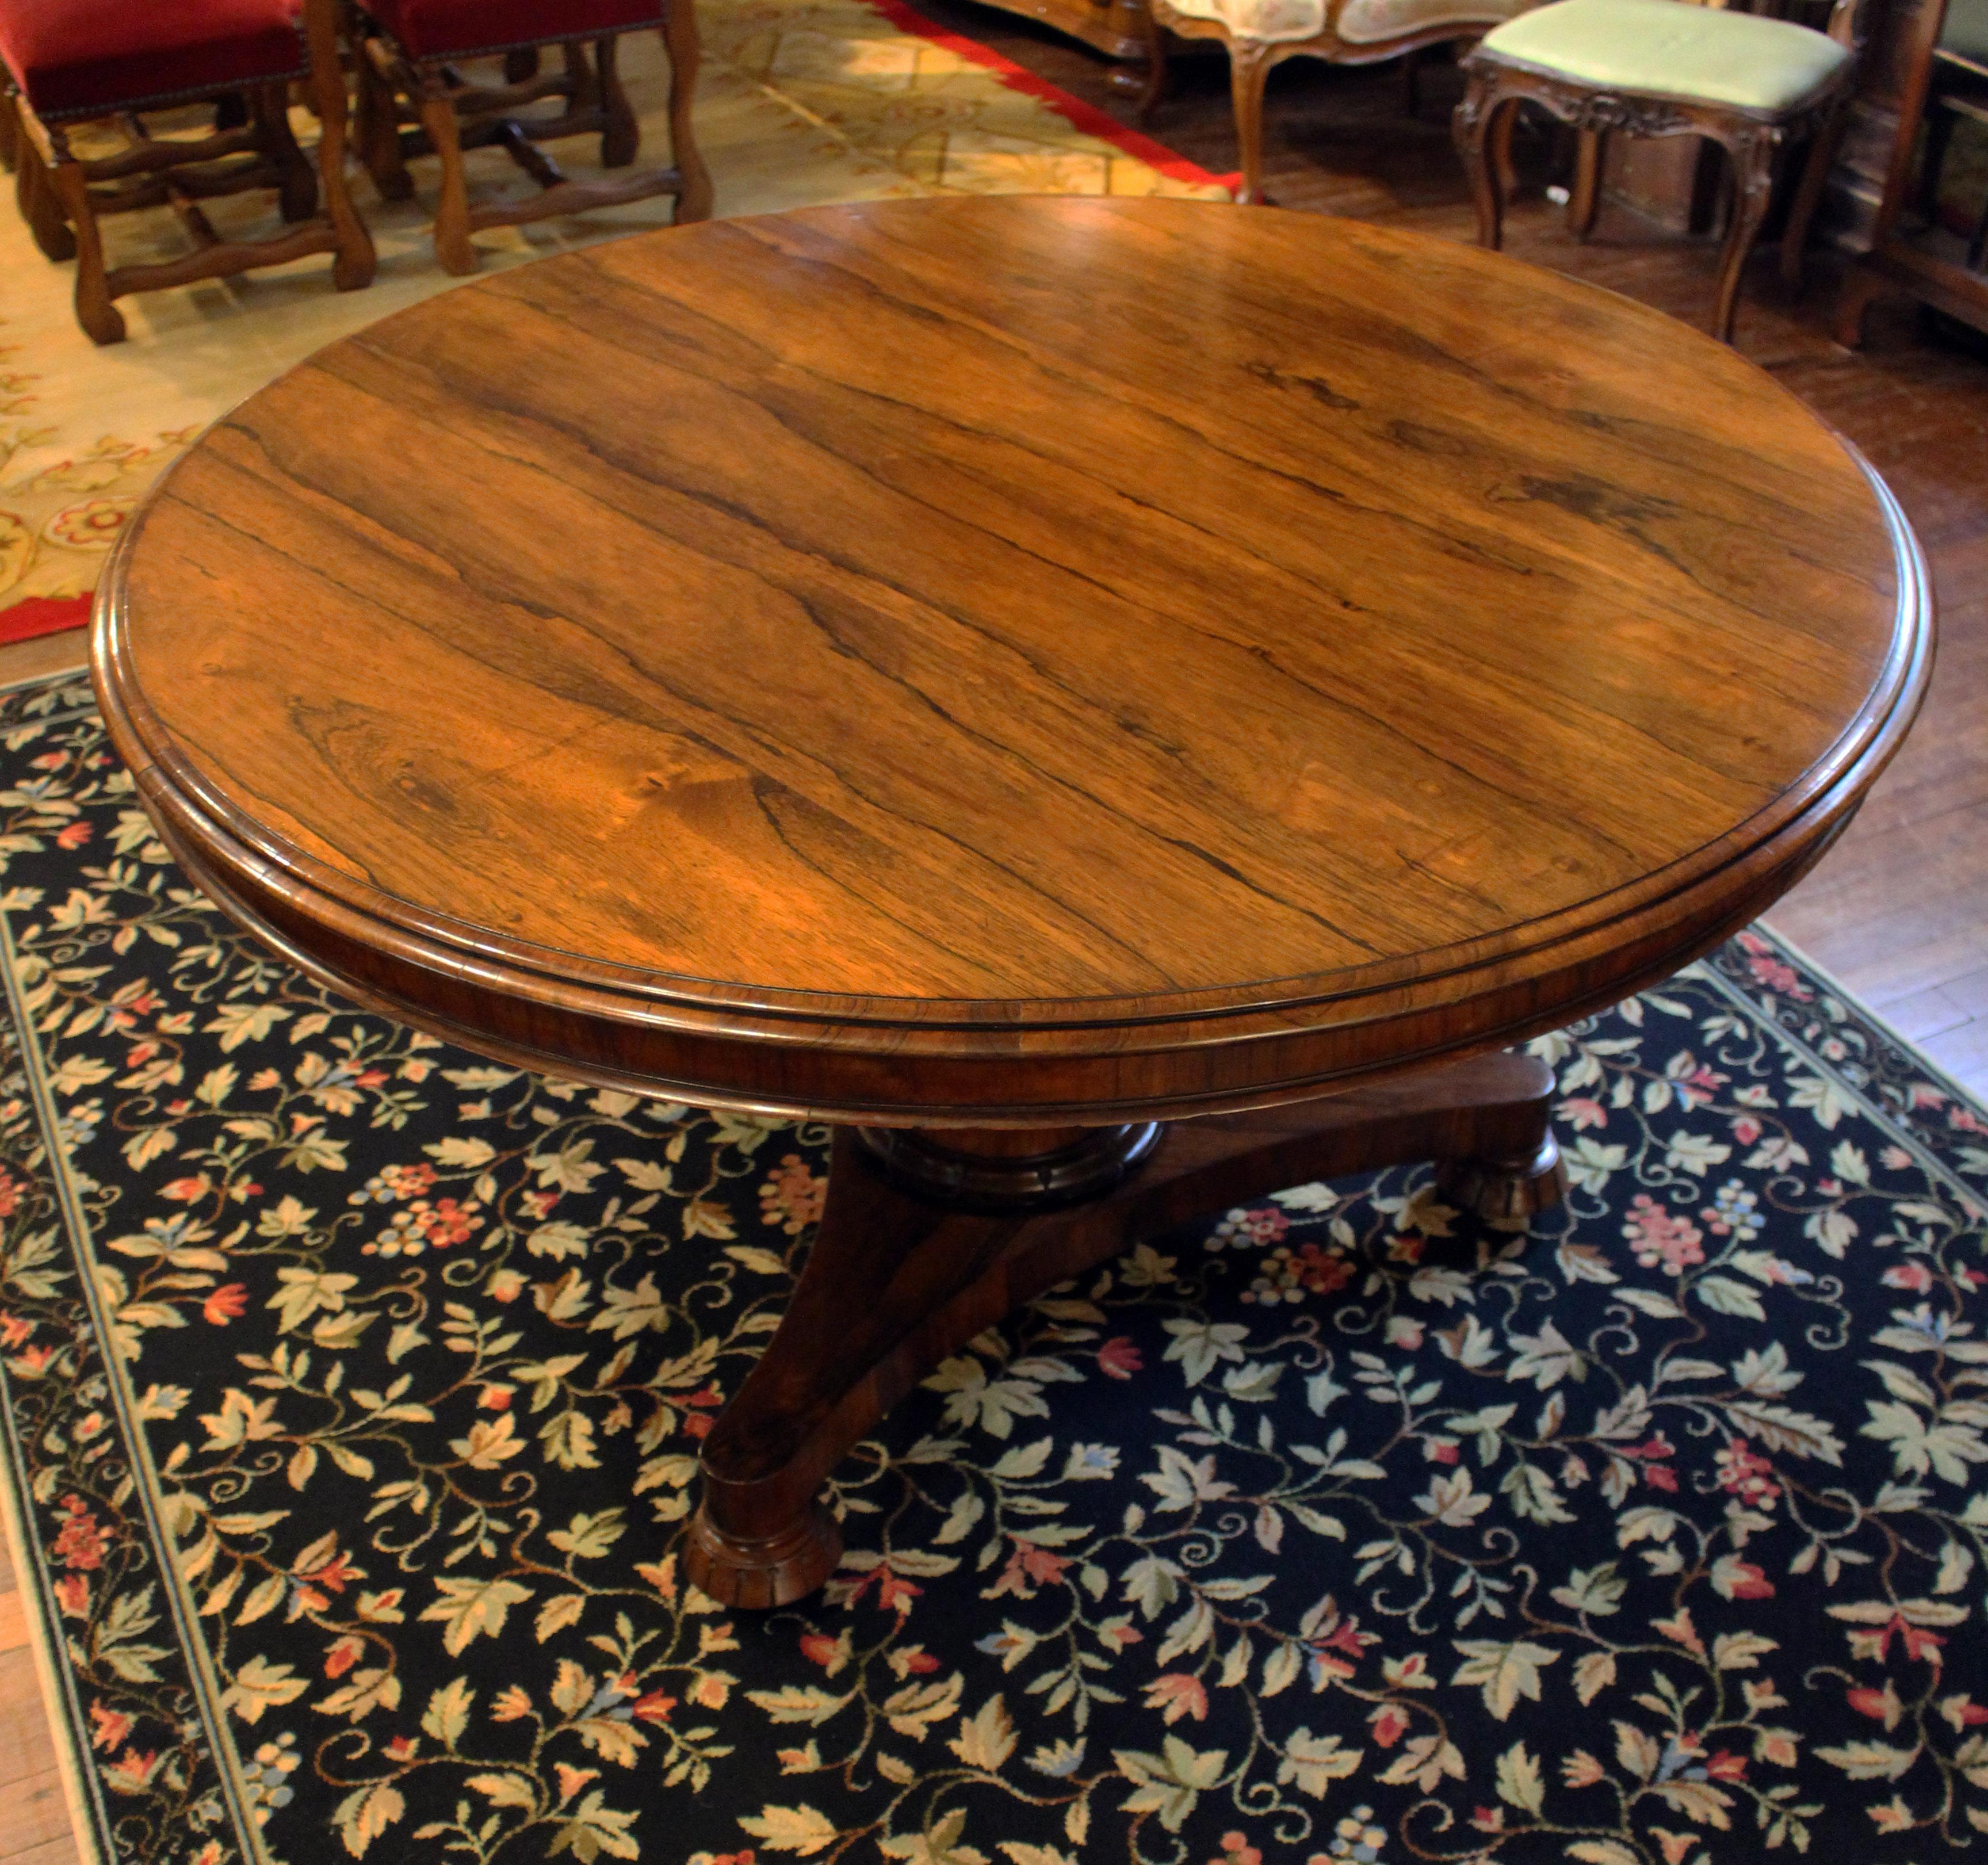 Early 19th century English loo or center table. Well figured rosewood veneers on mahogany & oak. Superb construction. Old, high quality butterfly joints under top to counteract shrinkage. Pedestal with brass label: 